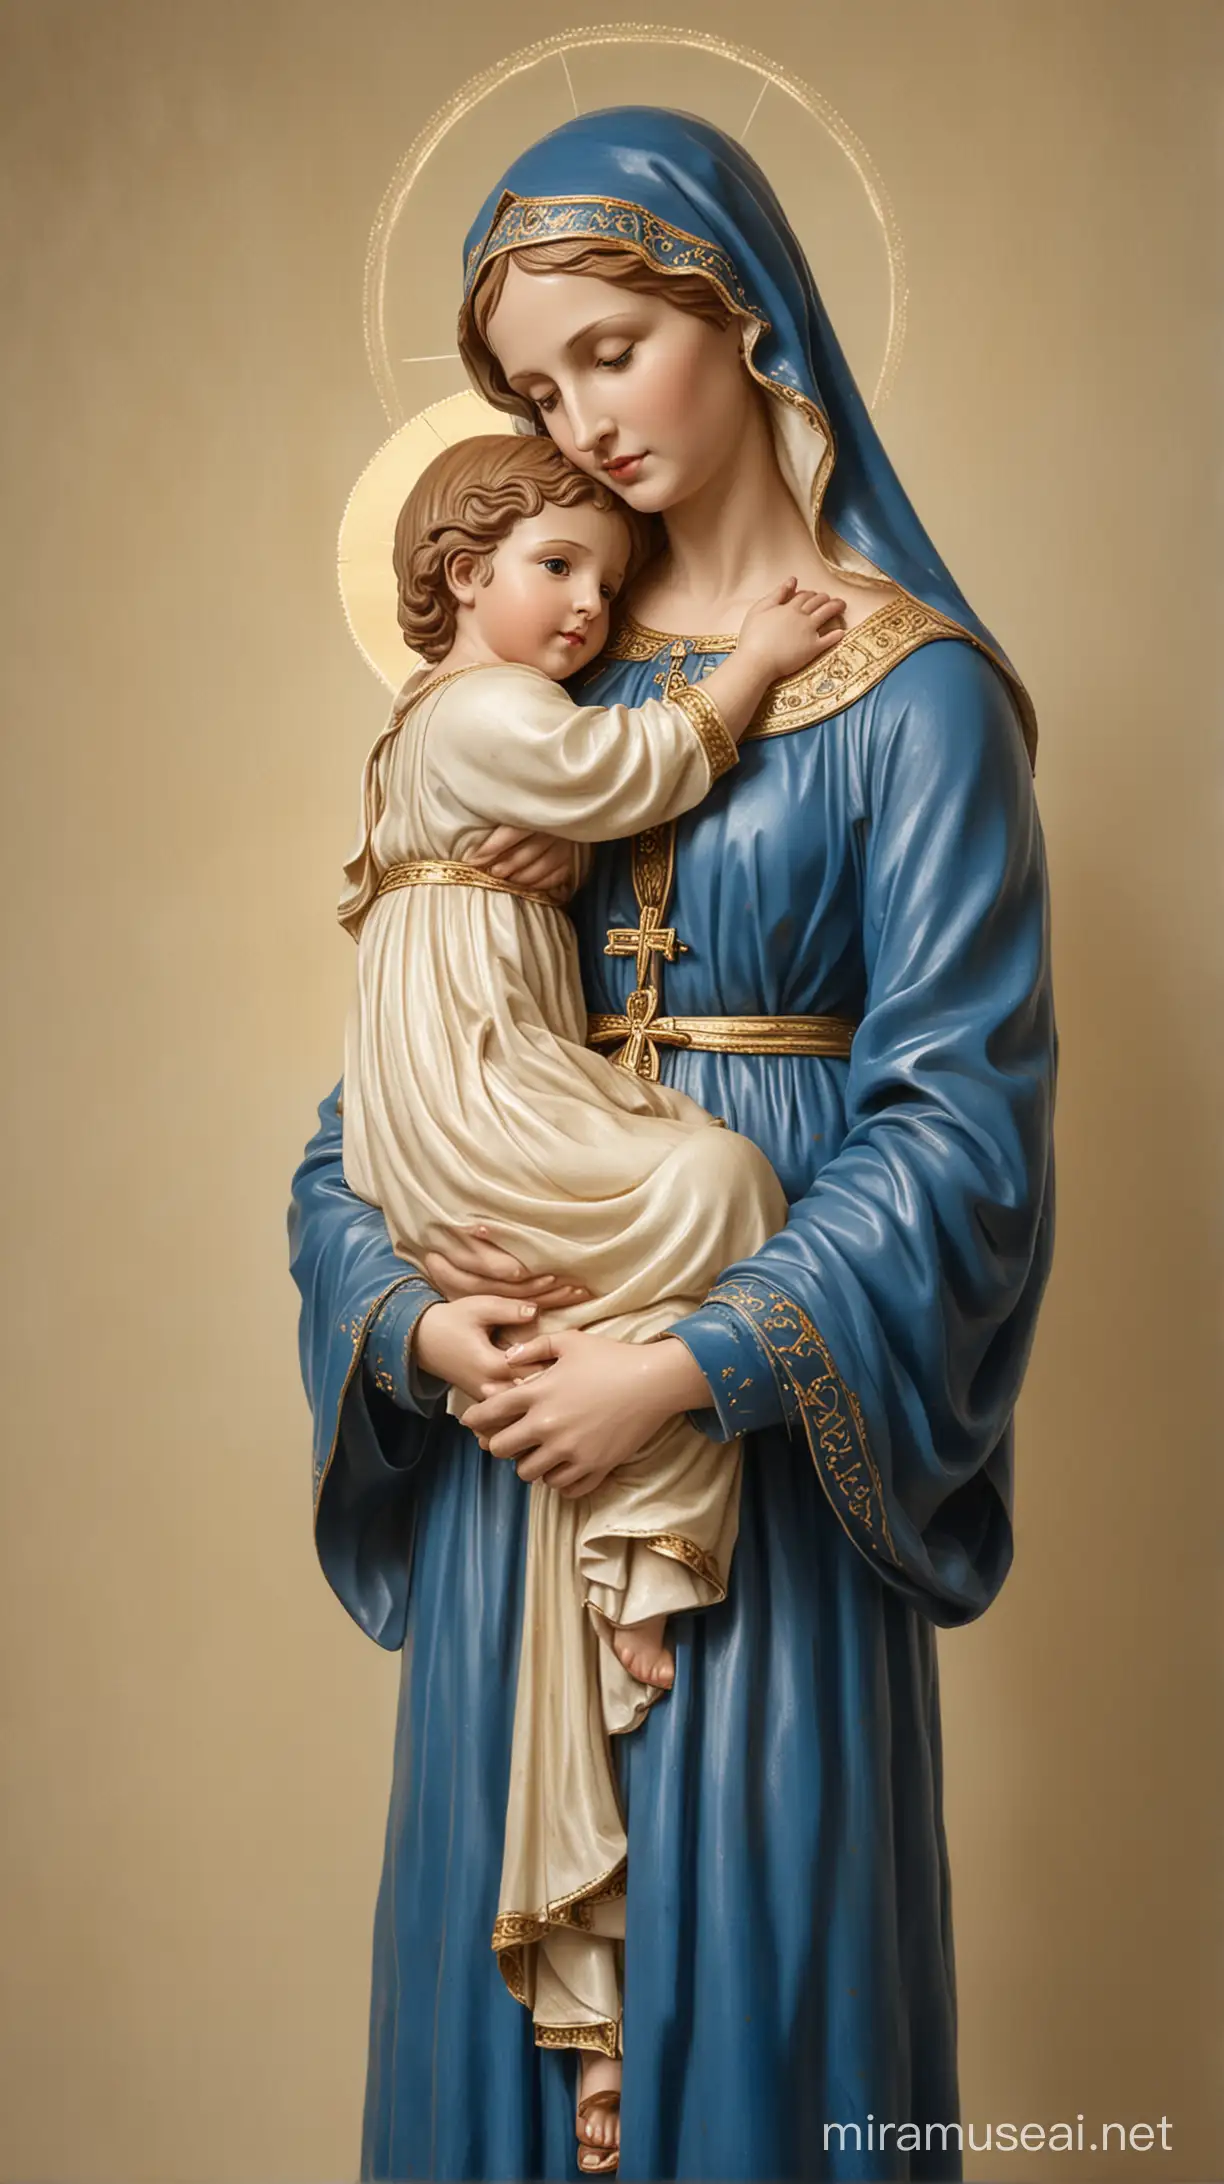 Our Lady, dressed in a blue dress, hugging children